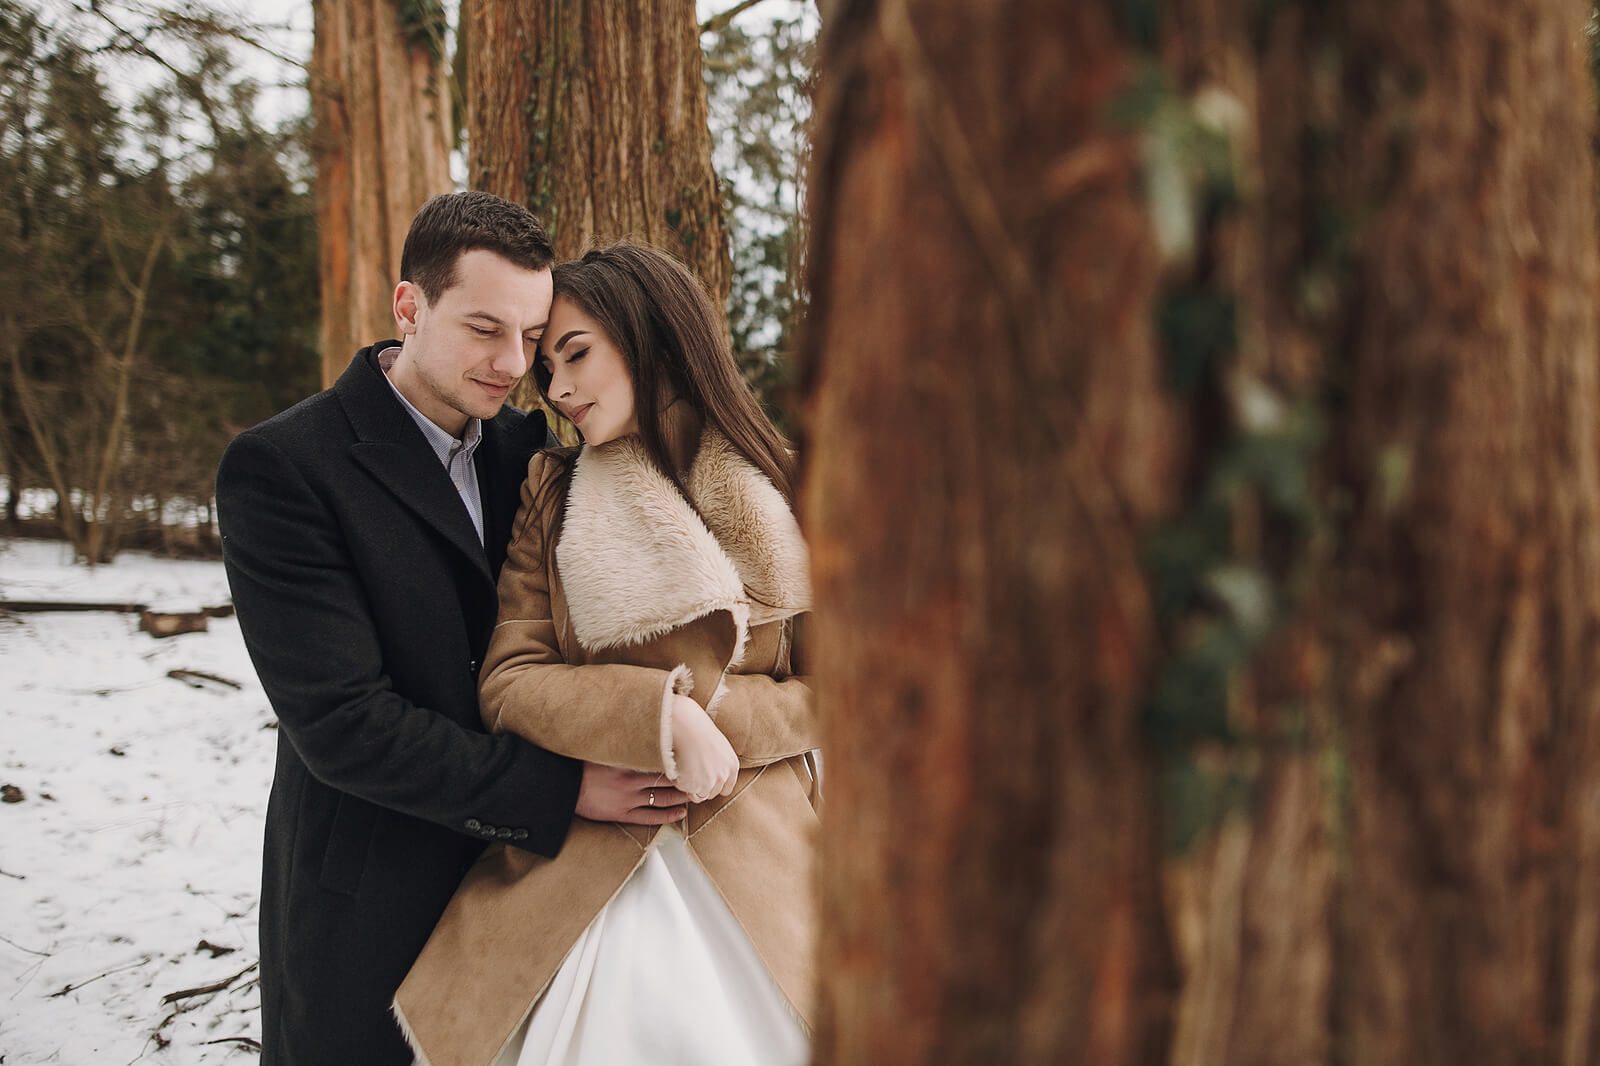 A winter wedding with the bride and groom posing amongst trees in the snow